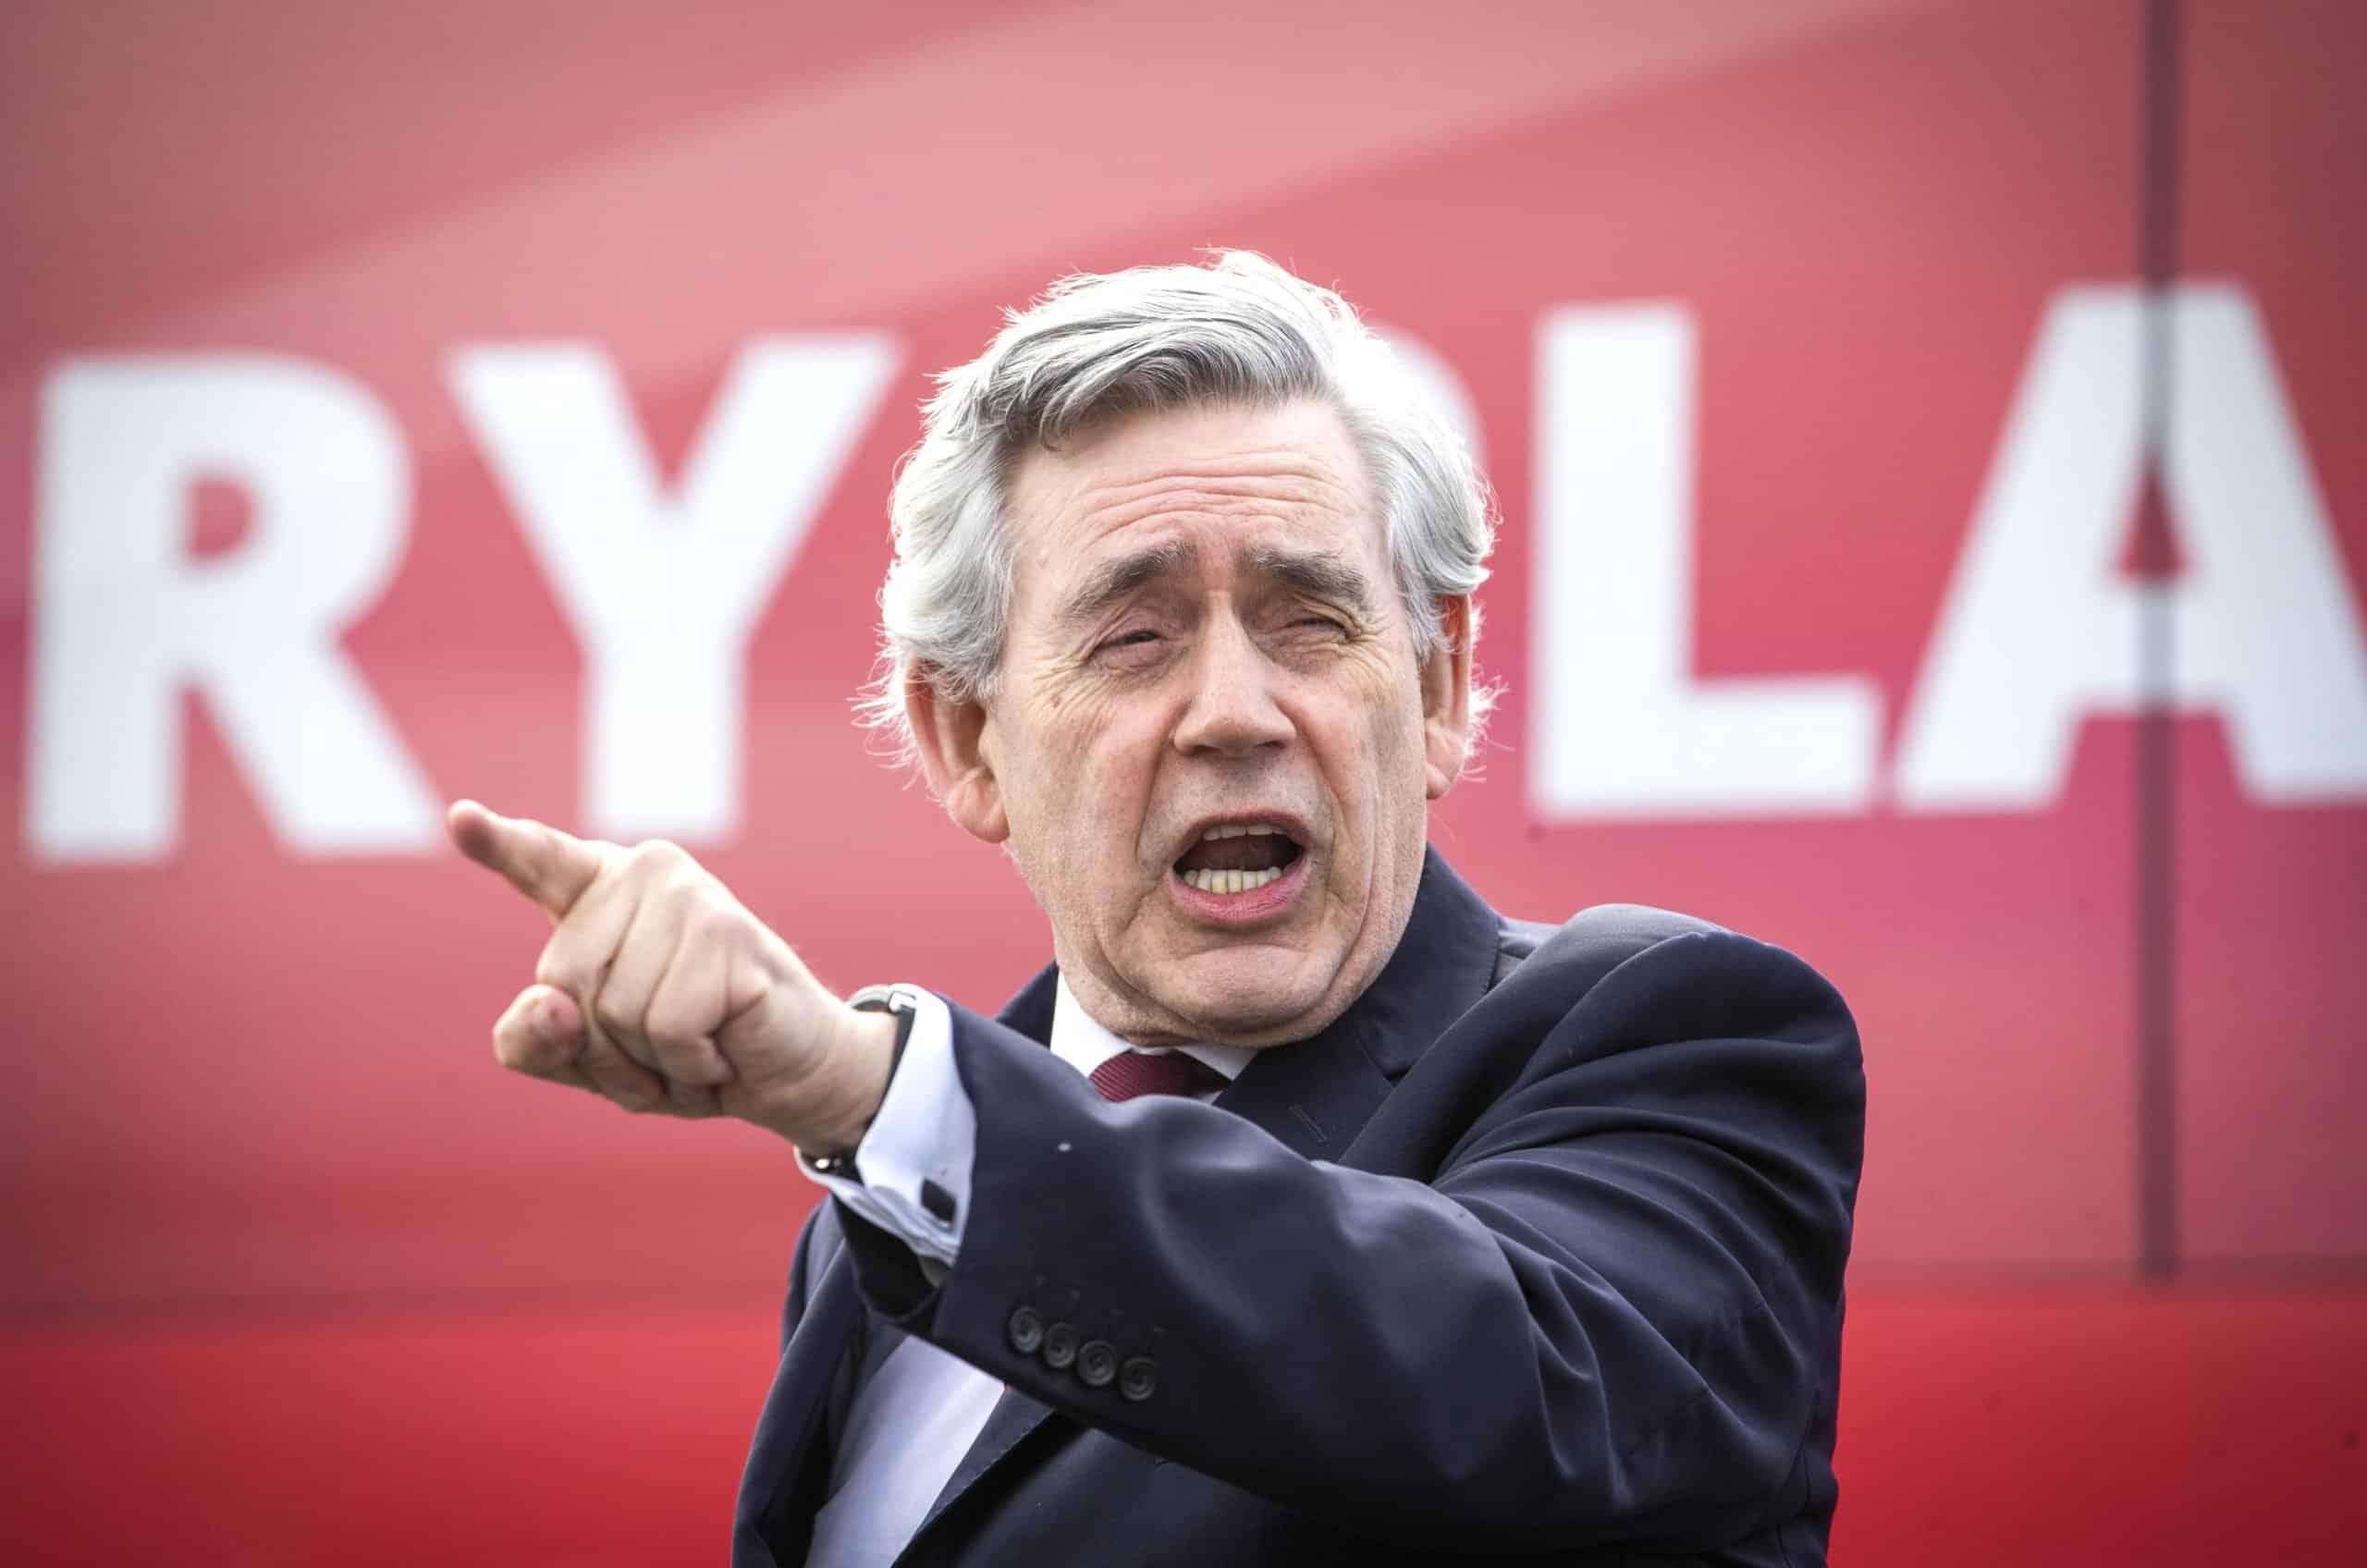 Brown: Labour will ditch over-centralisation that has brought ‘Conservative sleaze and scandal’